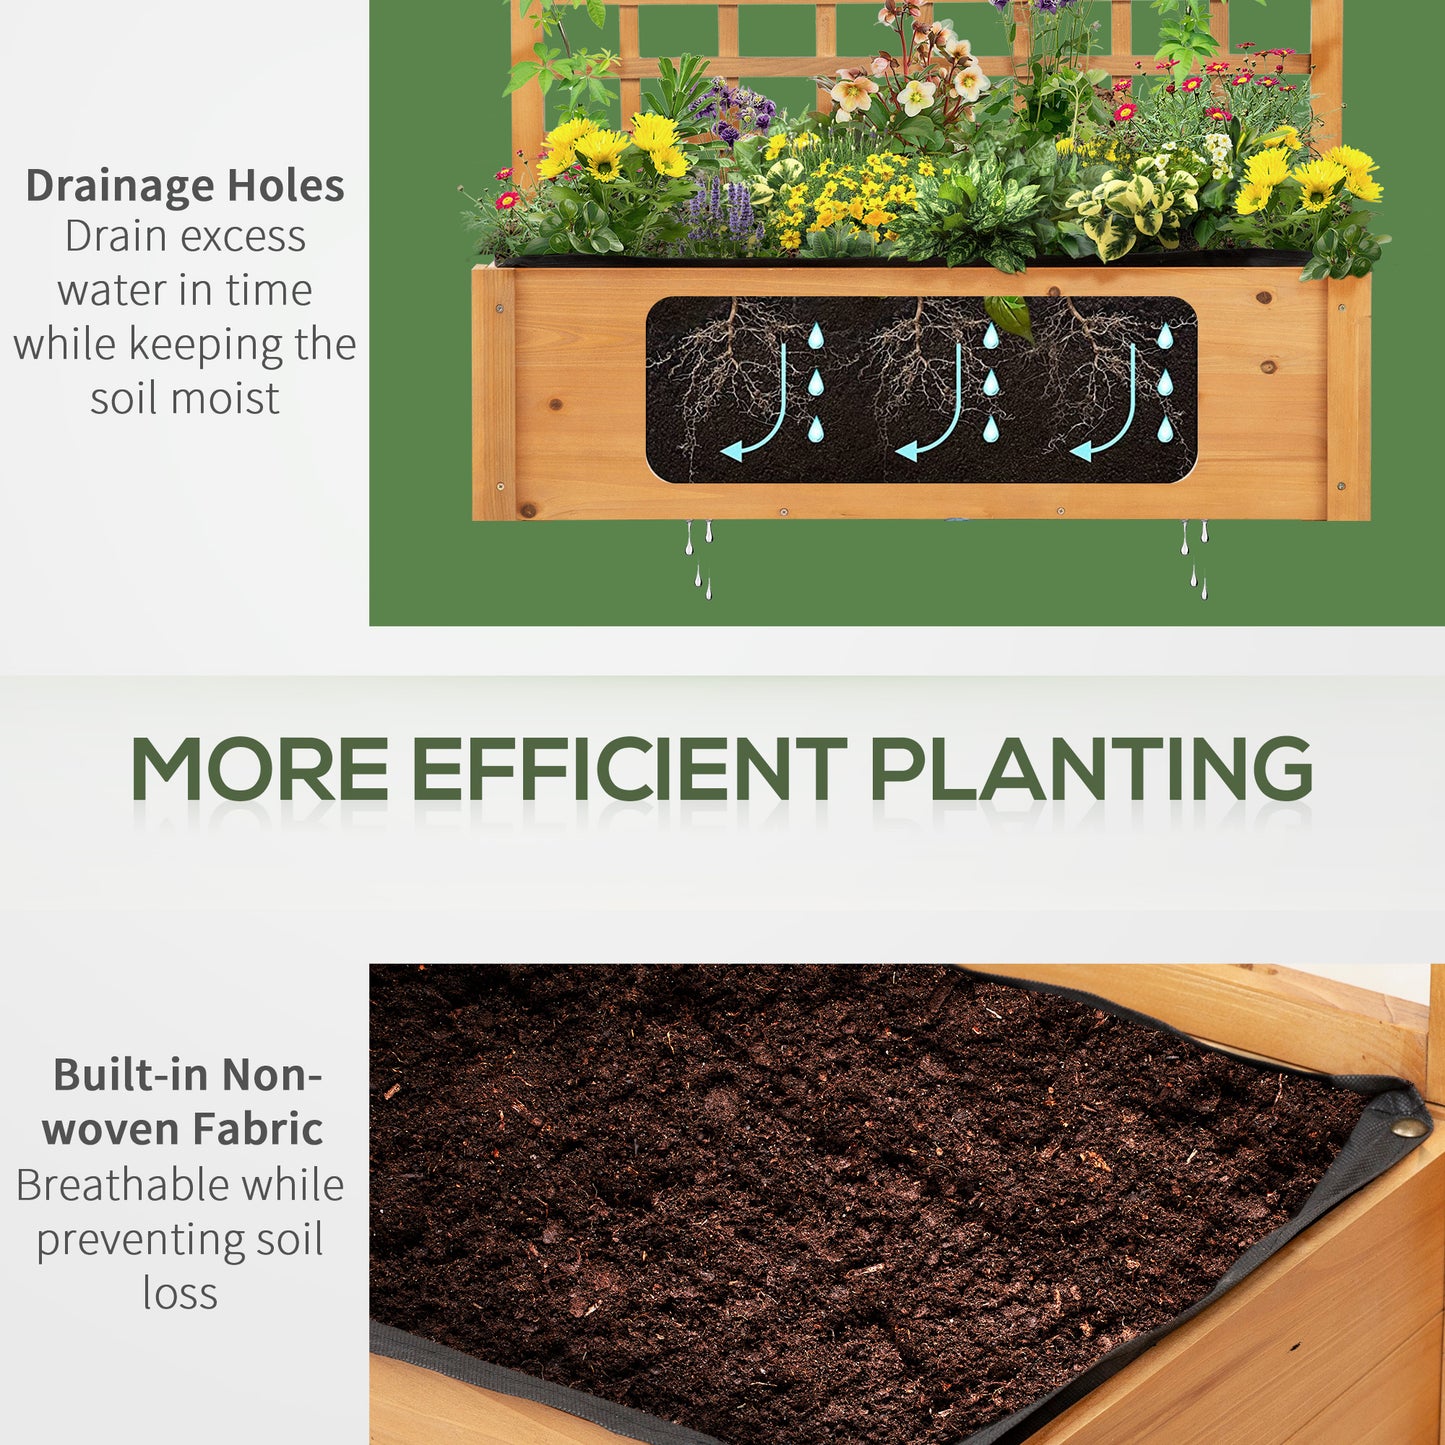 Outsunny Elevated Garden Bed: Raised Wooden Planter with Shelves for Veggies, Flowers, and Herbs, 105x40x135cm